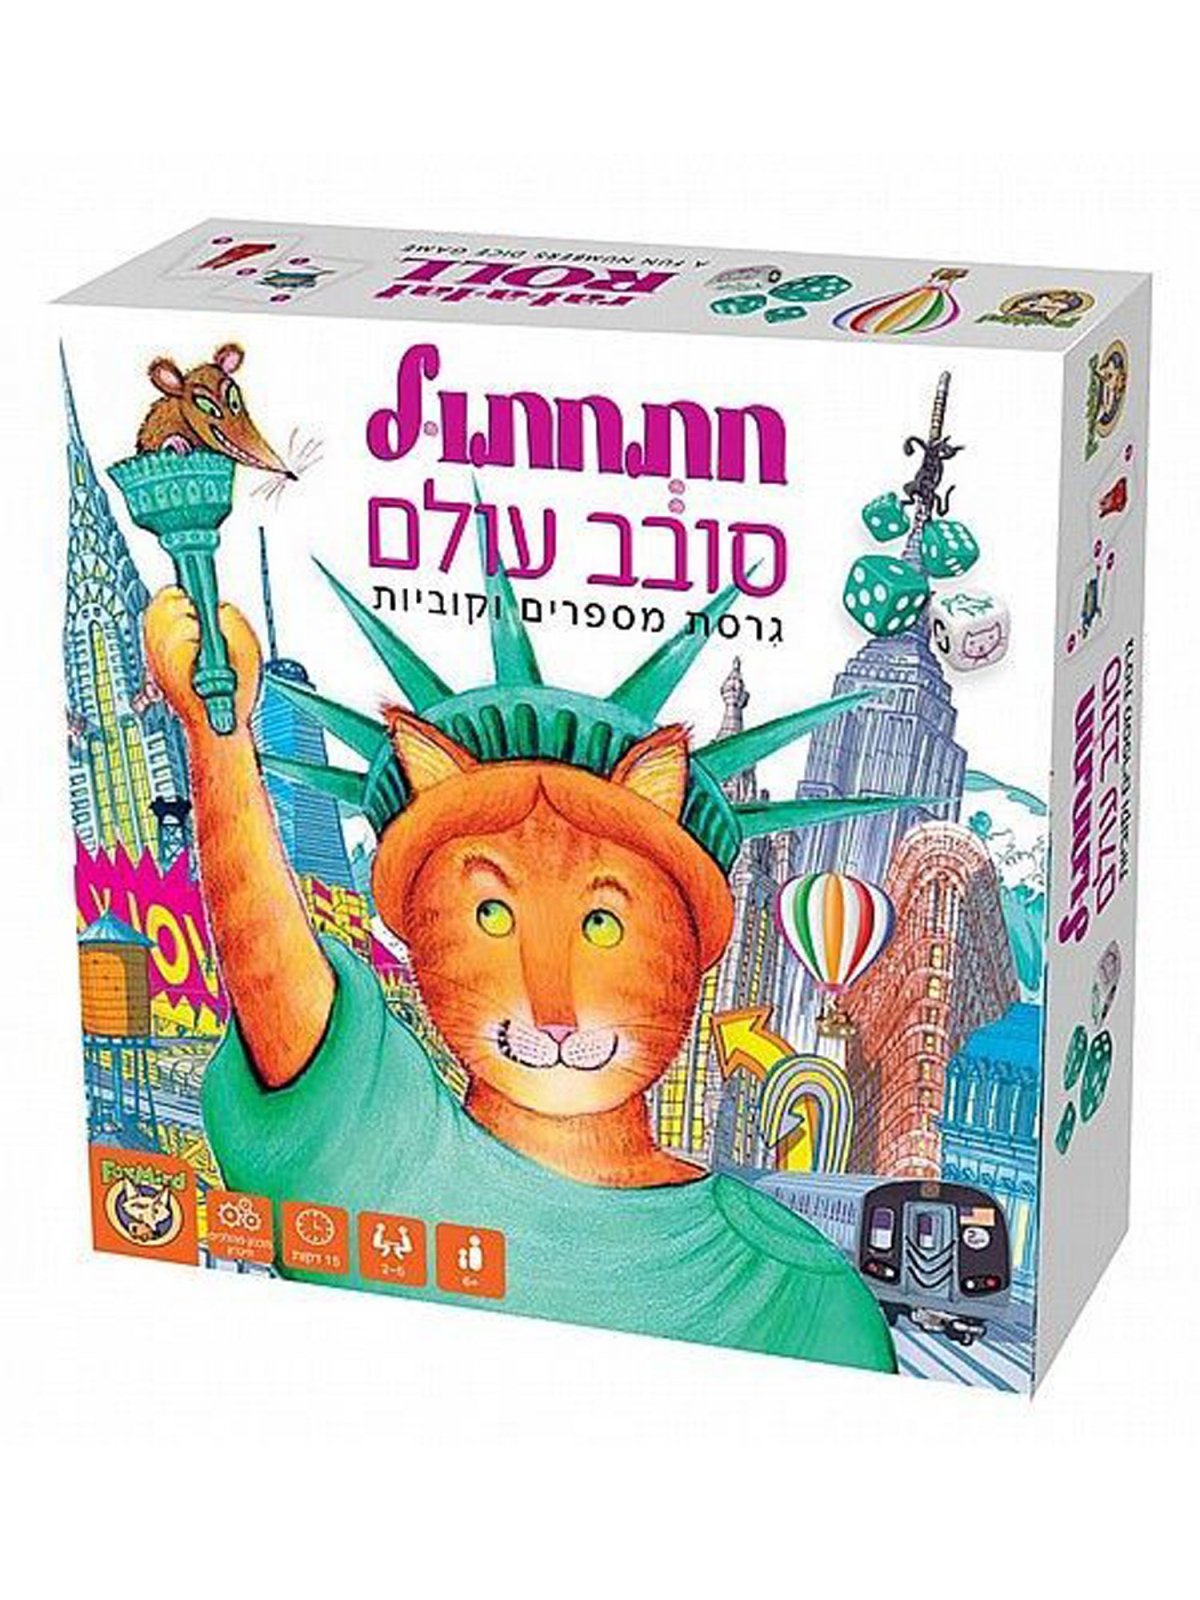 CAT GOES AROUND THE WORLD BOARD GAME